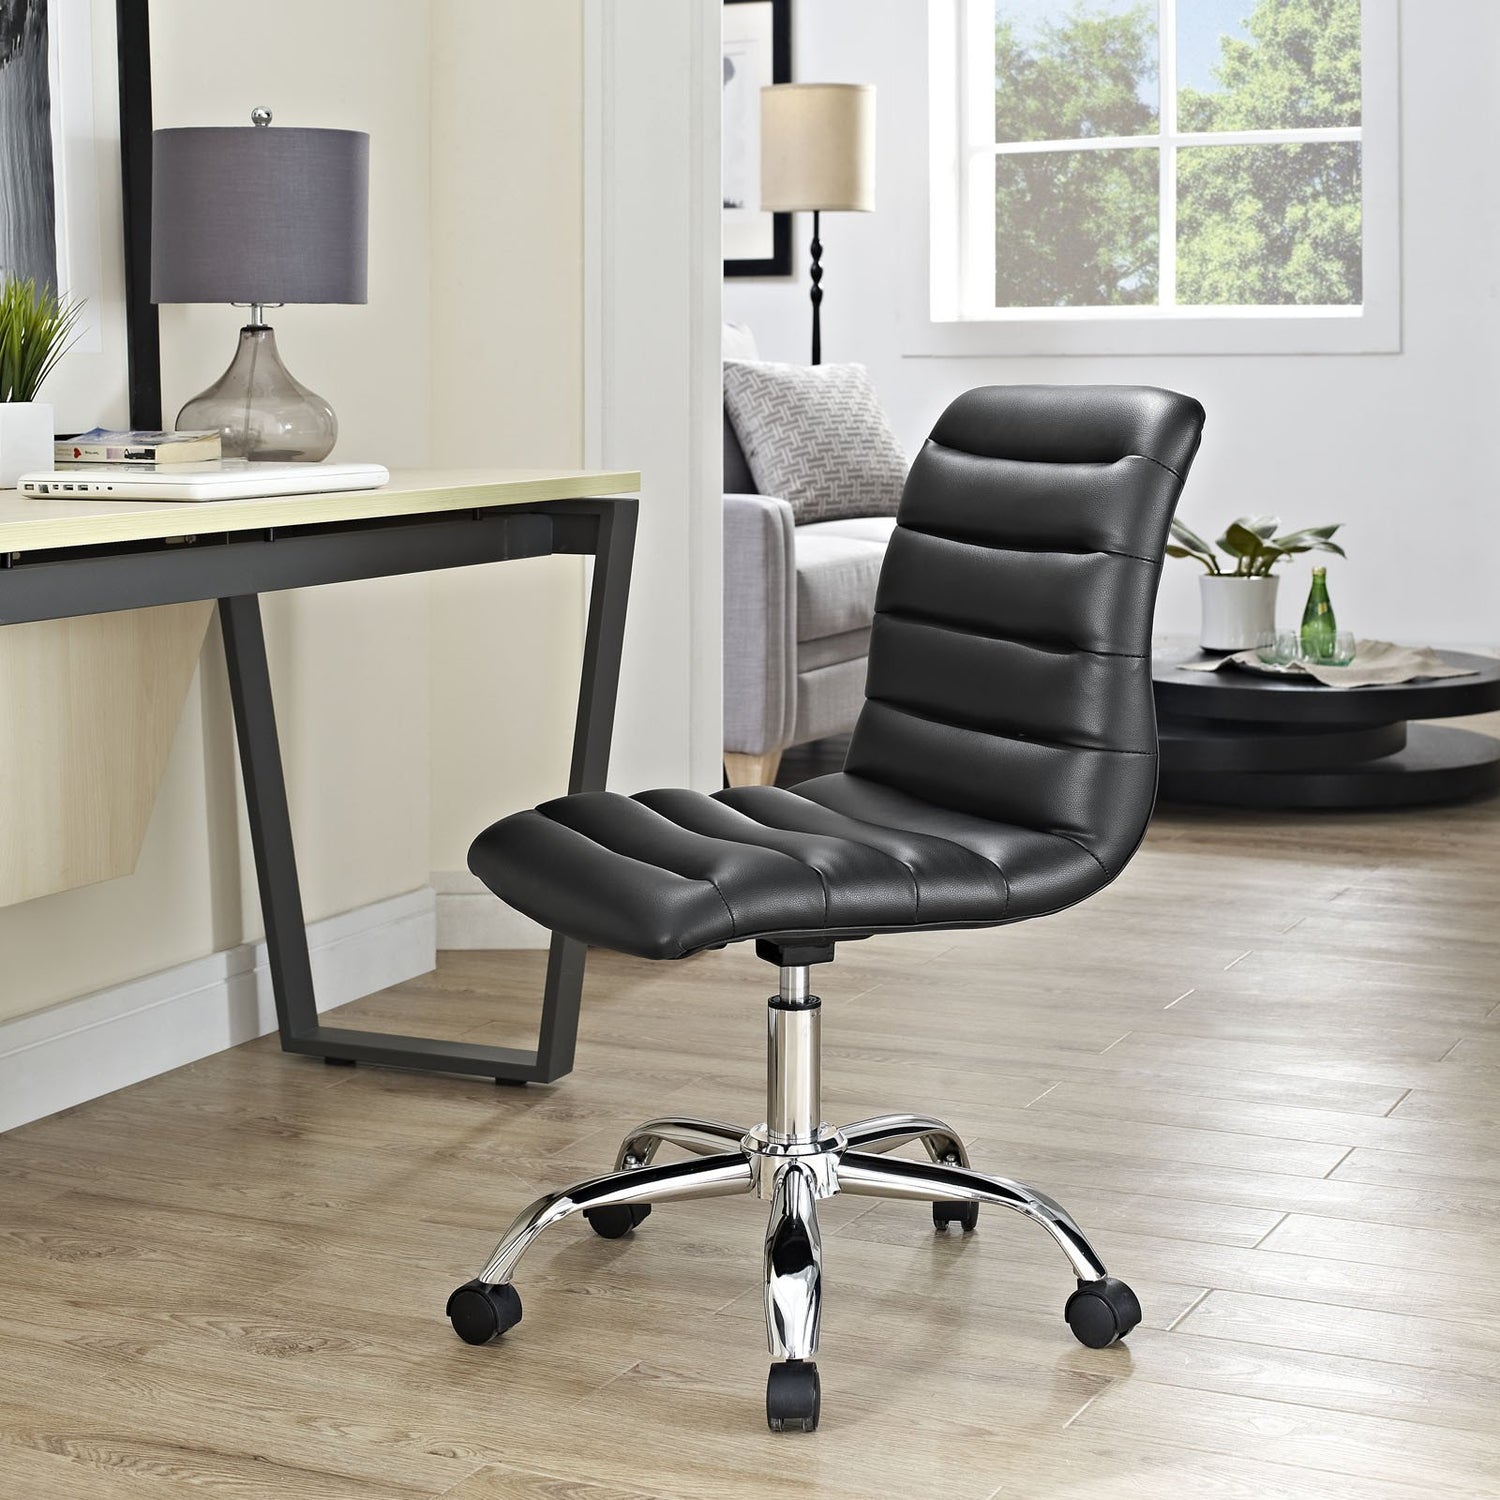 Office Chairs & Office Desks